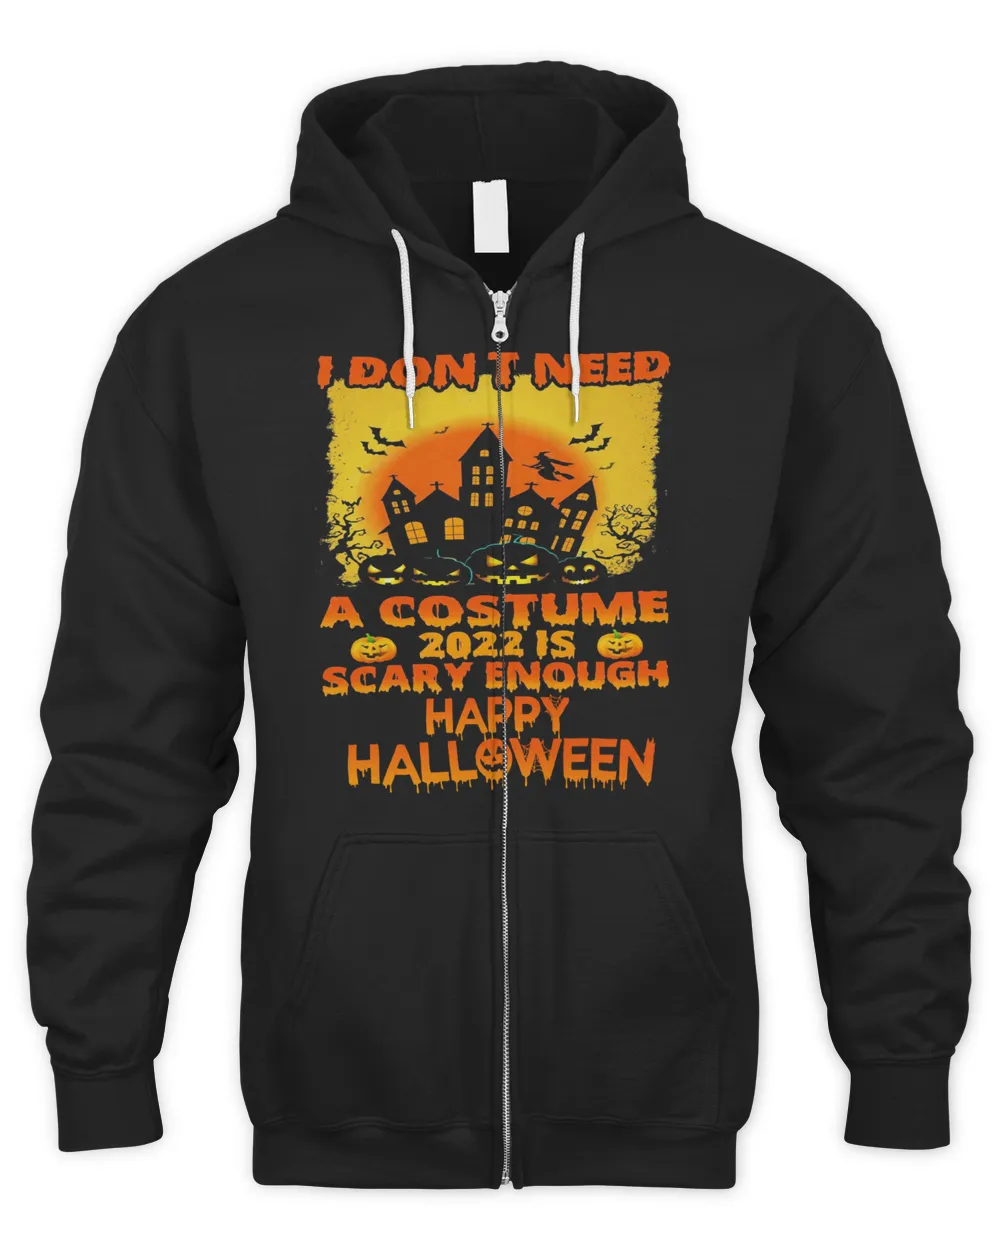 I Don't Need A Costume 2022 Is Scary Enough Happy Halloween Shirt